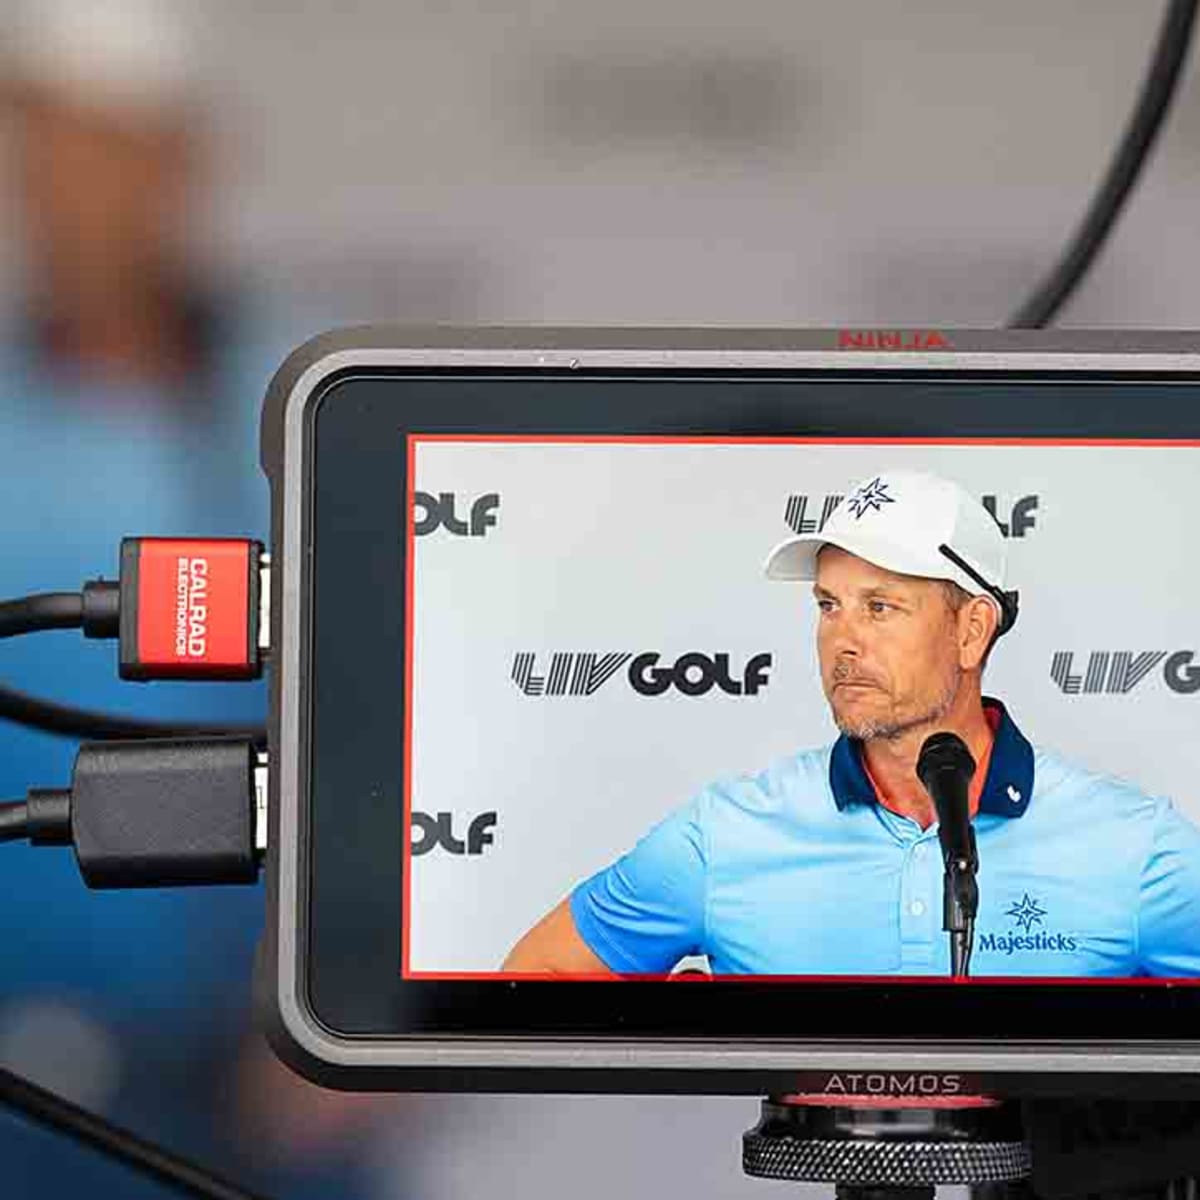 Pay-Per-View has come to golf, and someday viewers may have to decide